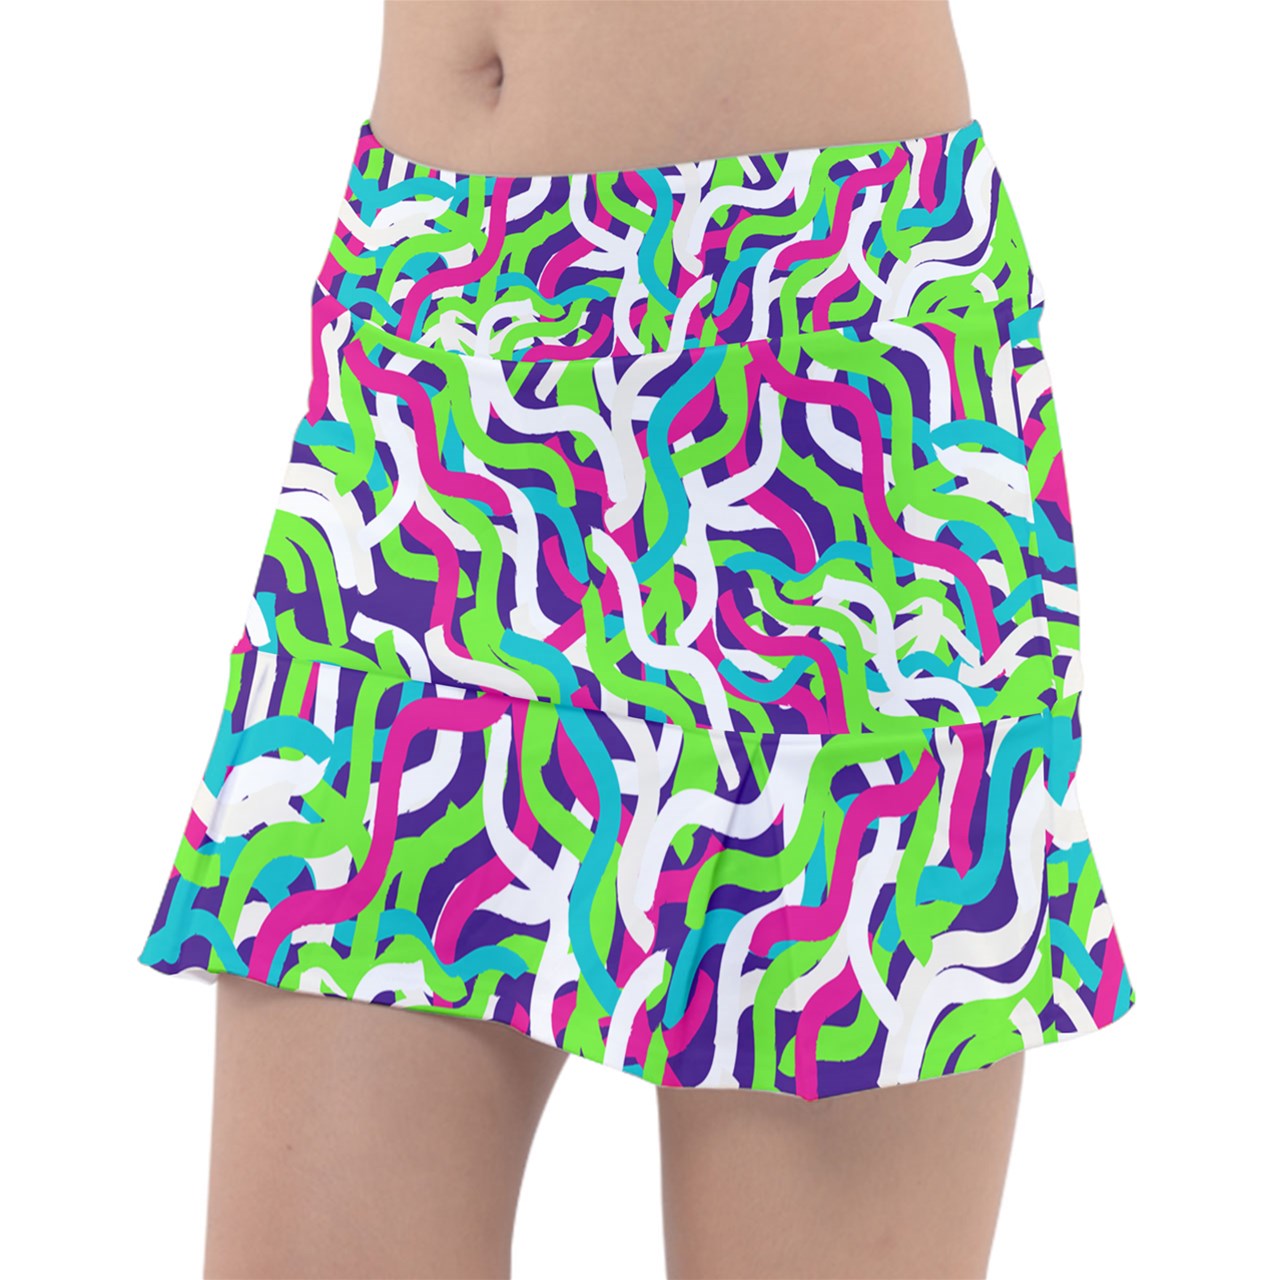 Dizzy Pickle Diana Strings Classic Women's Pickleball Pleated Skorts with Inner Shorts & Pockets